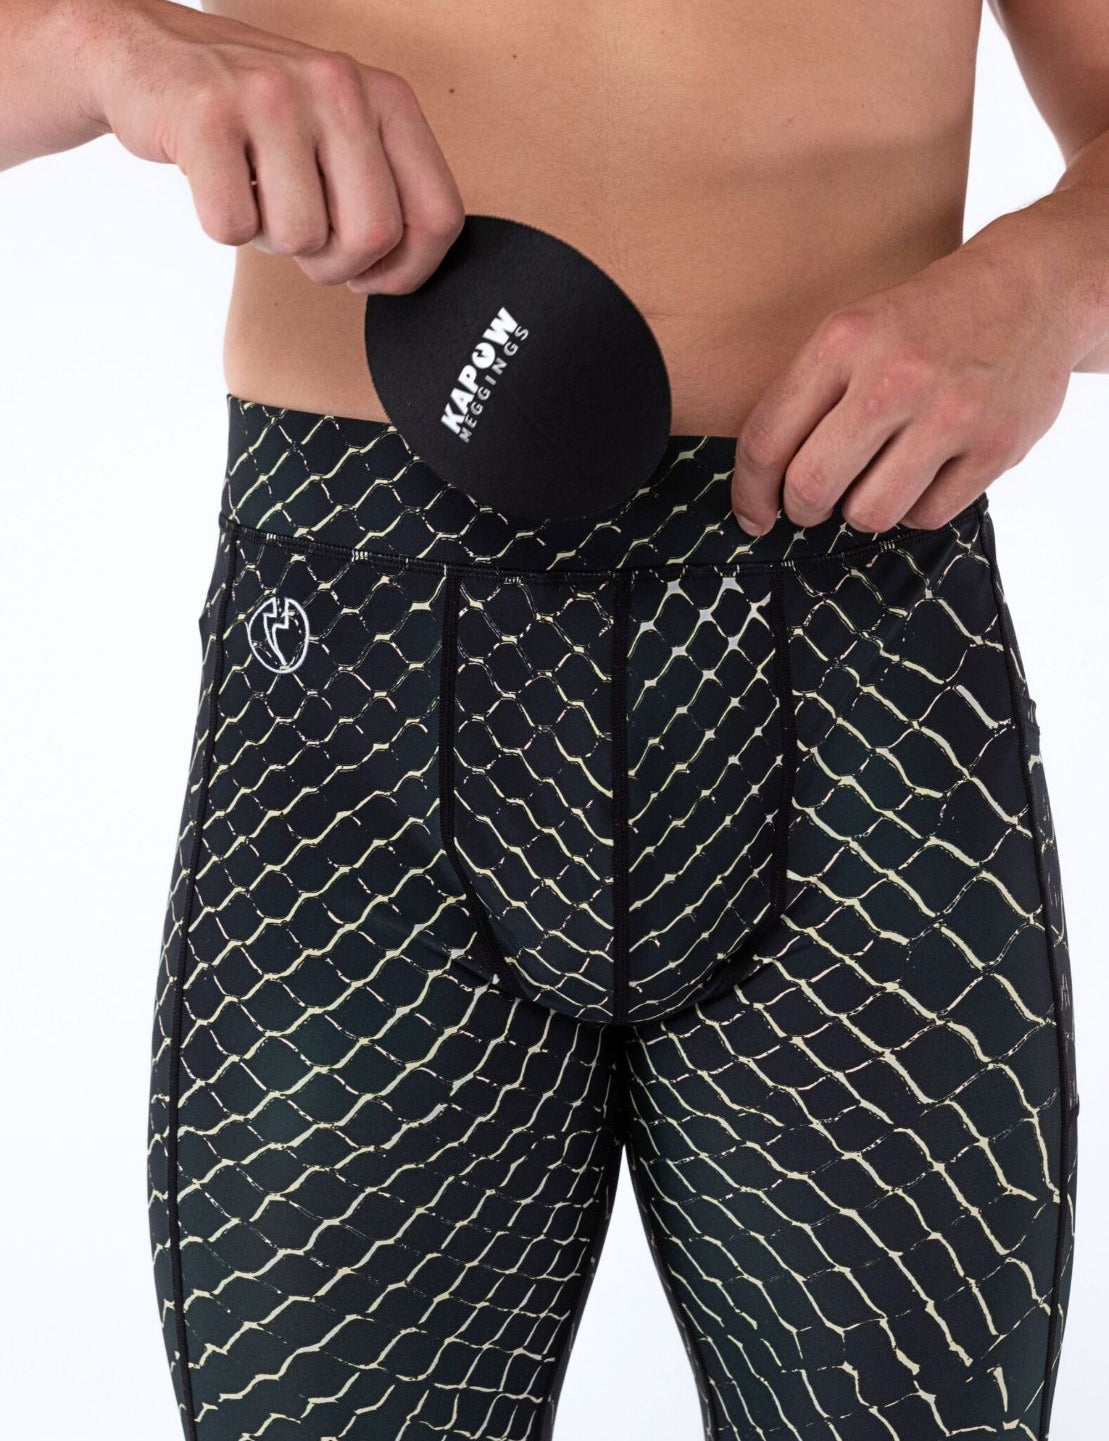 Taipan Meggings with Removable Crotch Pad - Kapow Meggings